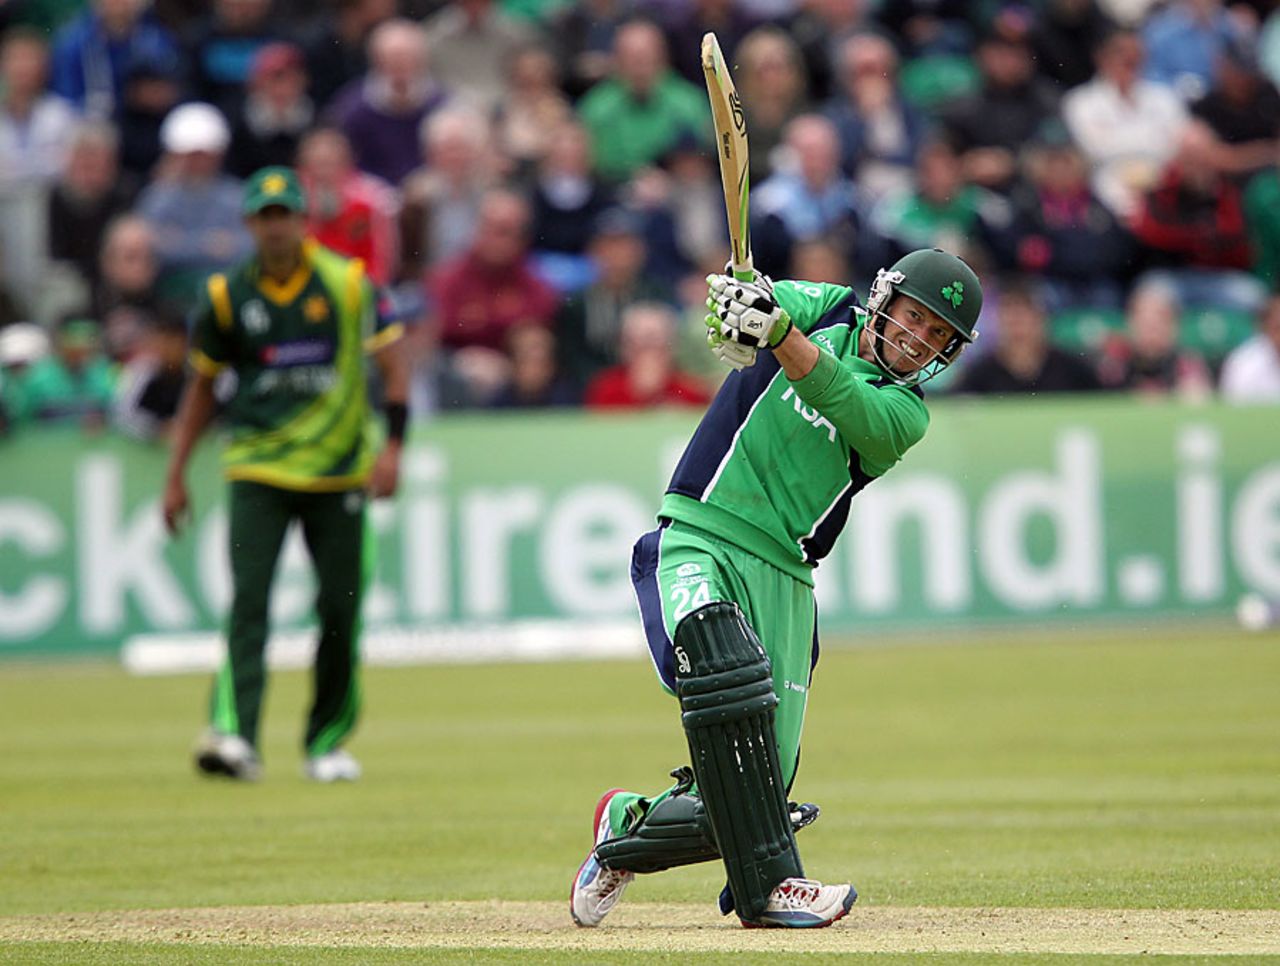 Ed Joyce steps out and hits over cow corner, Ireland v Pakistan, 2nd ODI, Dublin, May 26, 2013